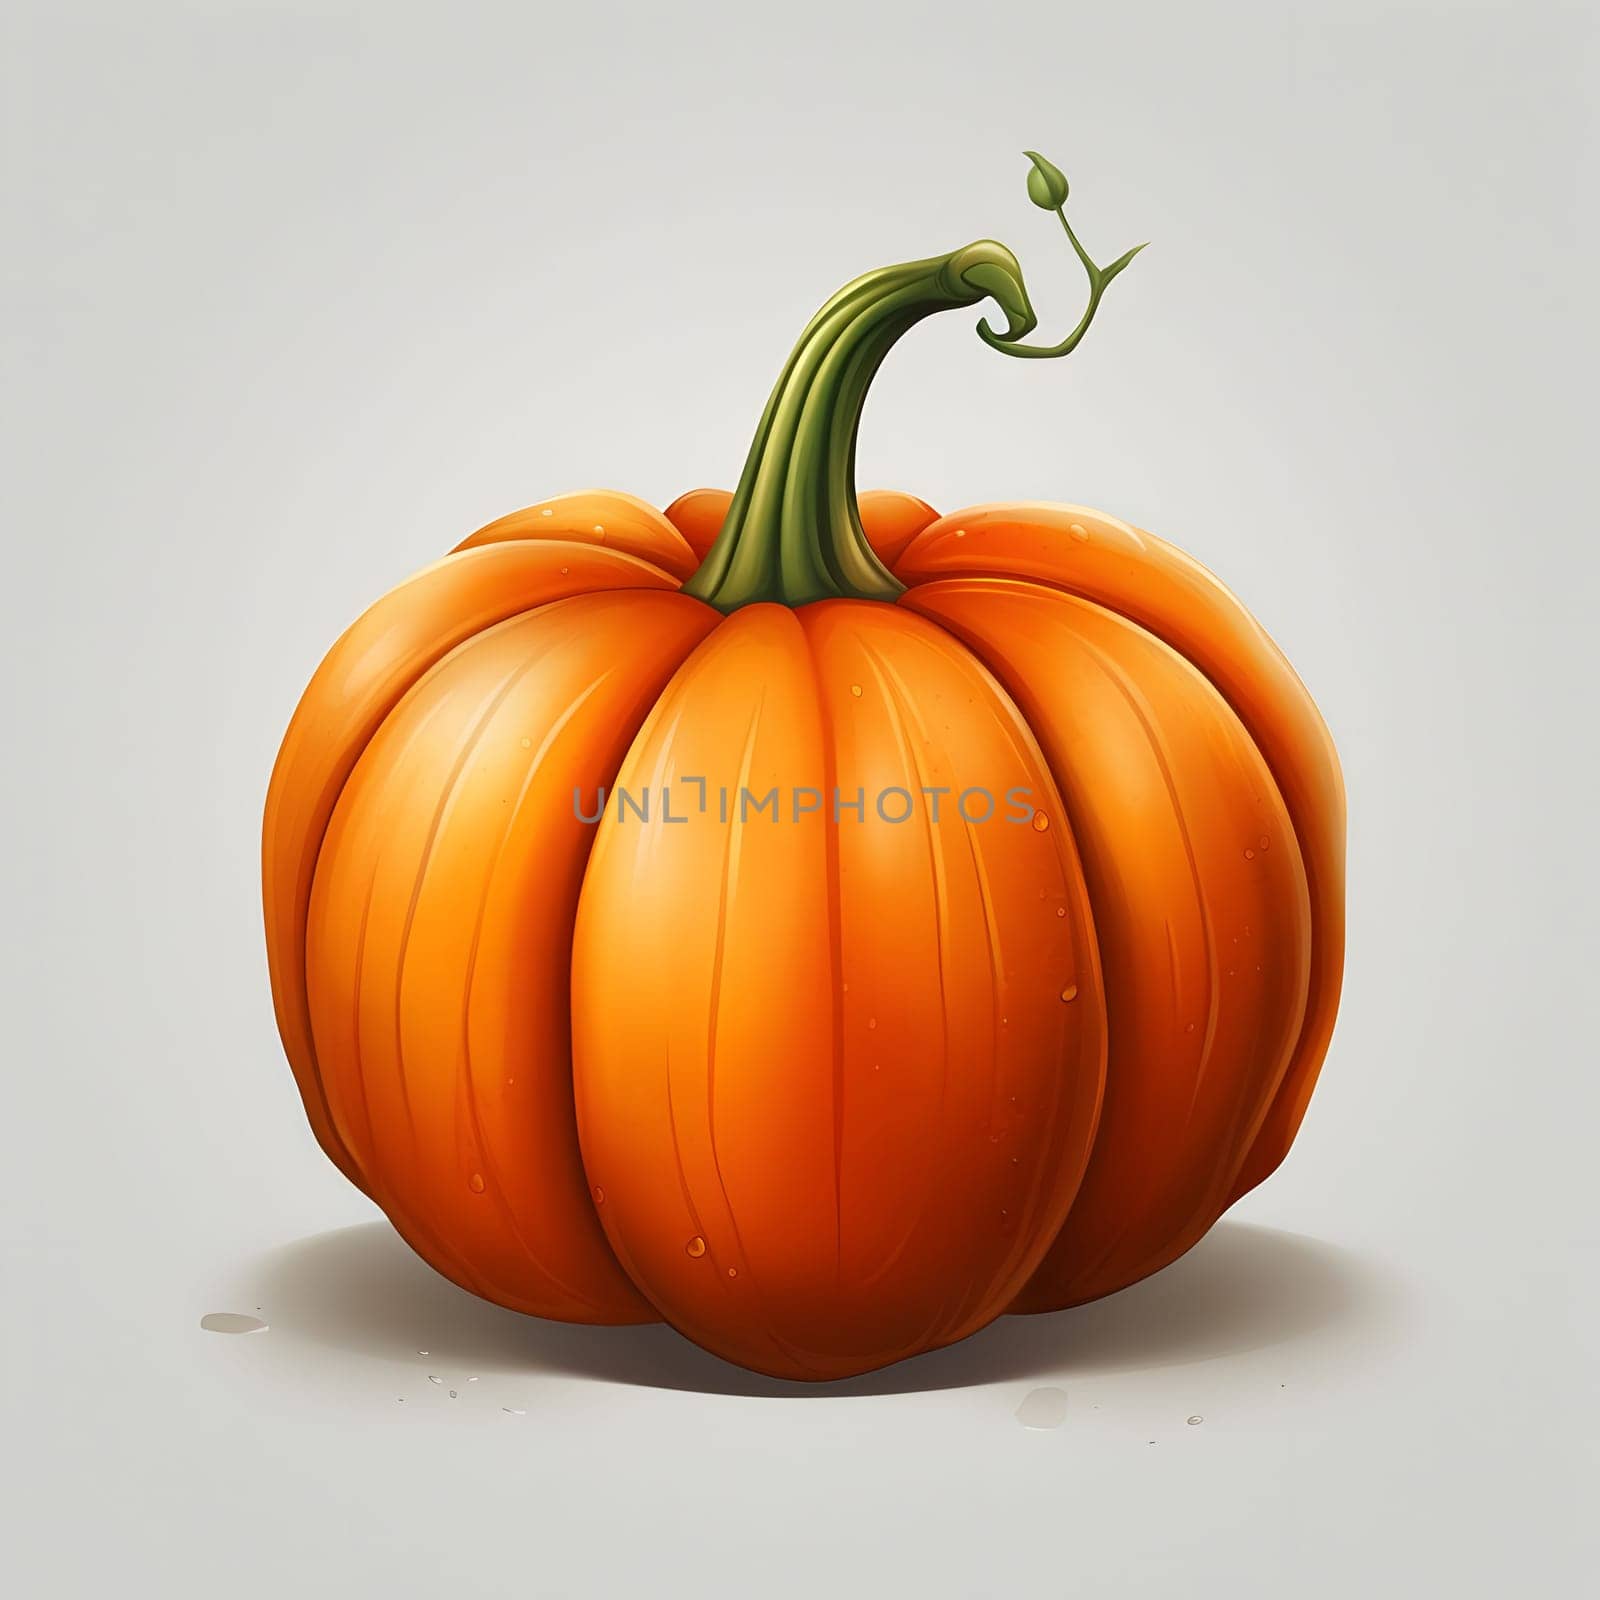 Isolated pumpkin 3D illustration on a solid light background. Pumpkin as a dish of thanksgiving for the harvest. by ThemesS